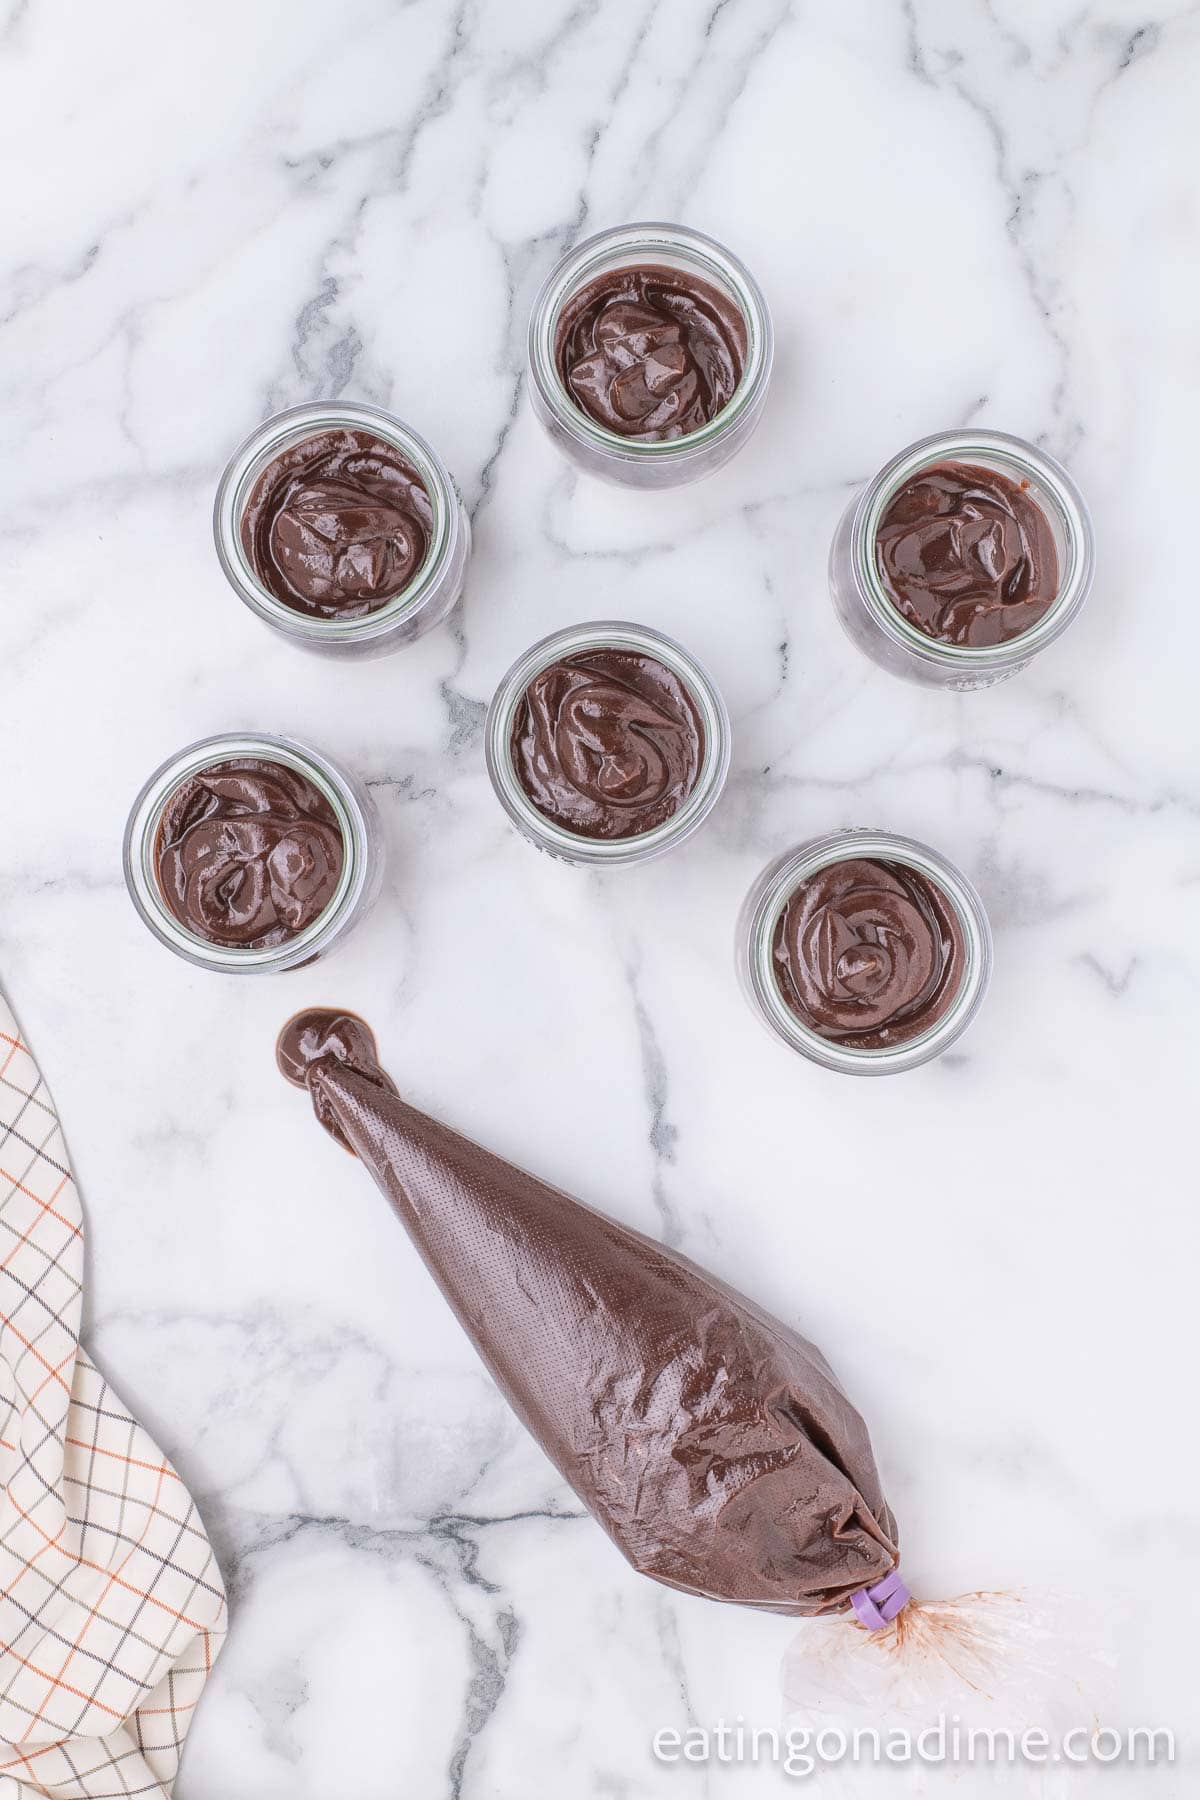 Piping chocolate into jars on the graham cracker crust